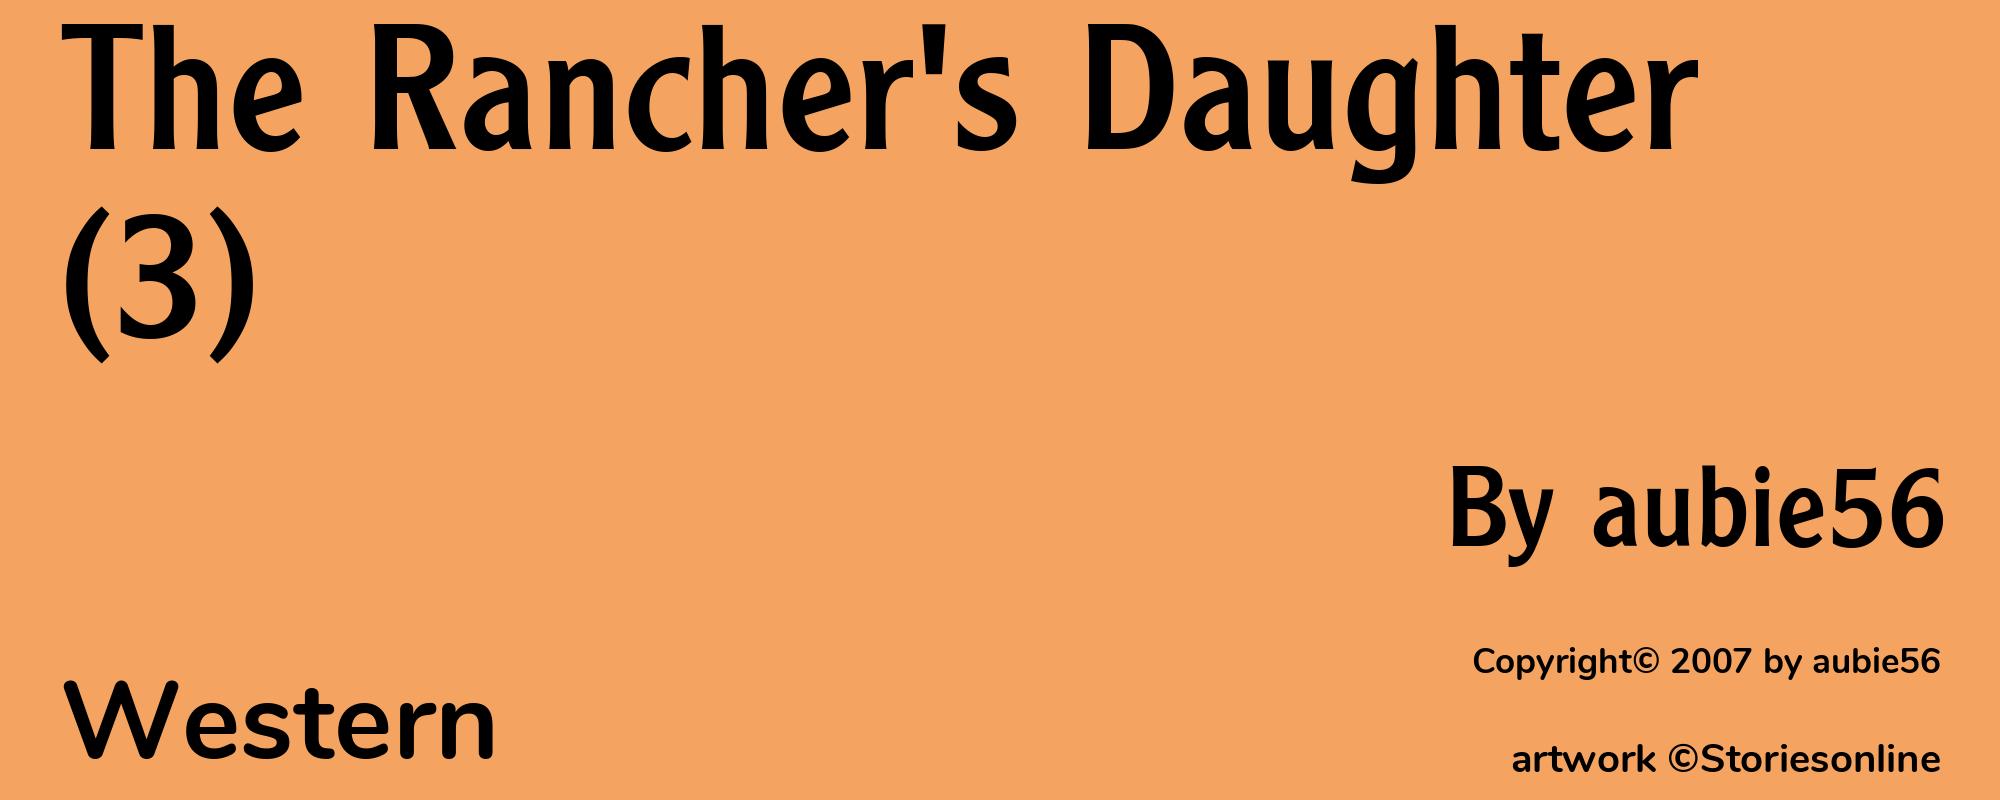 The Rancher's Daughter(3) - Cover